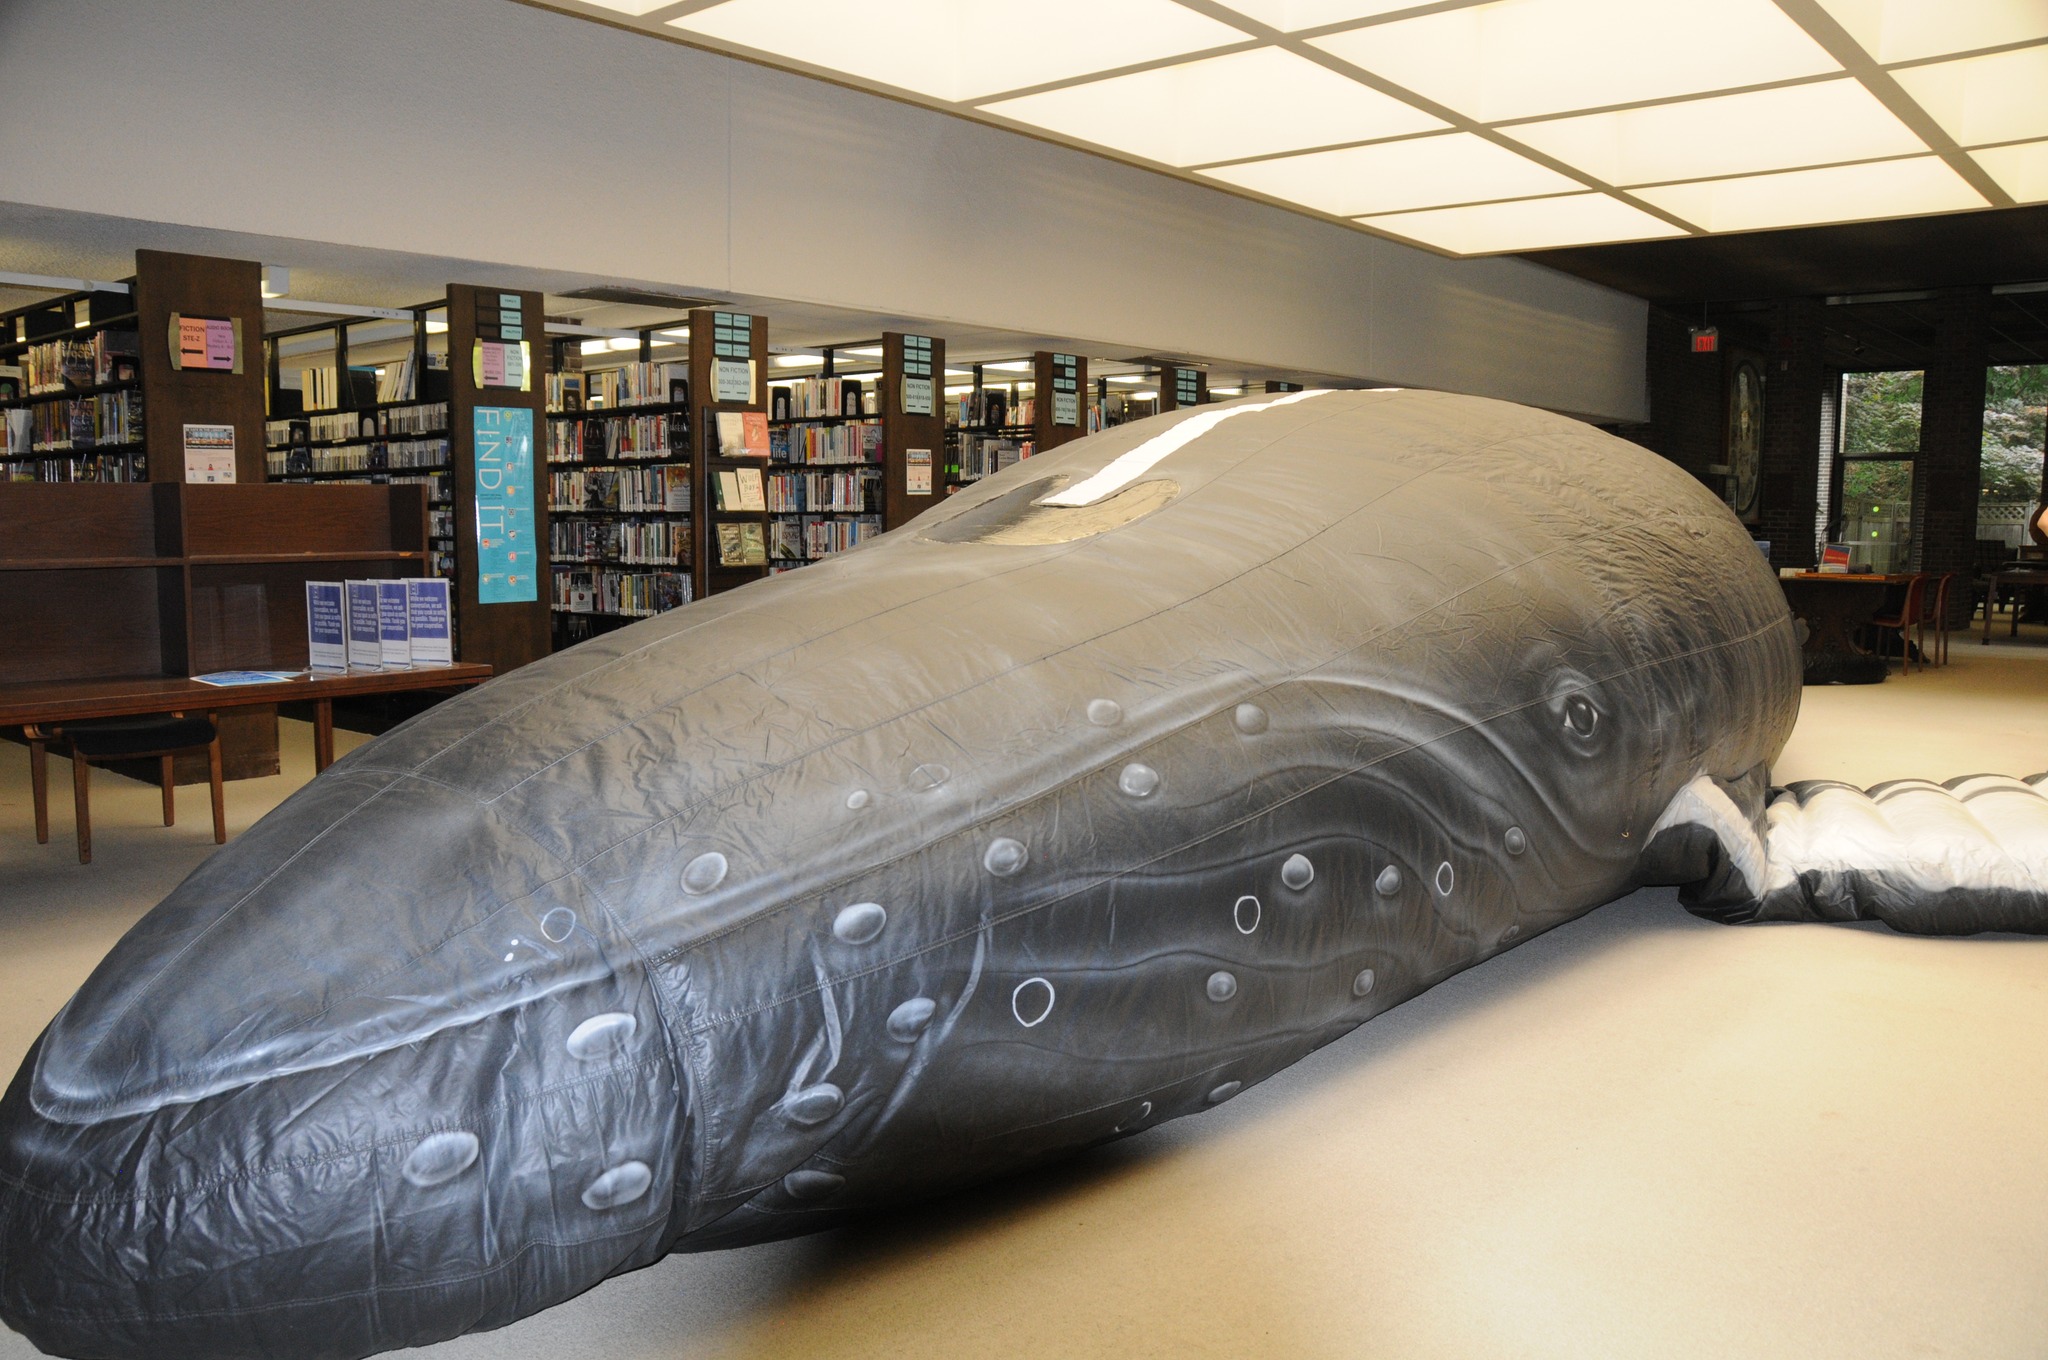 WhaleMobile visits the Beals Library